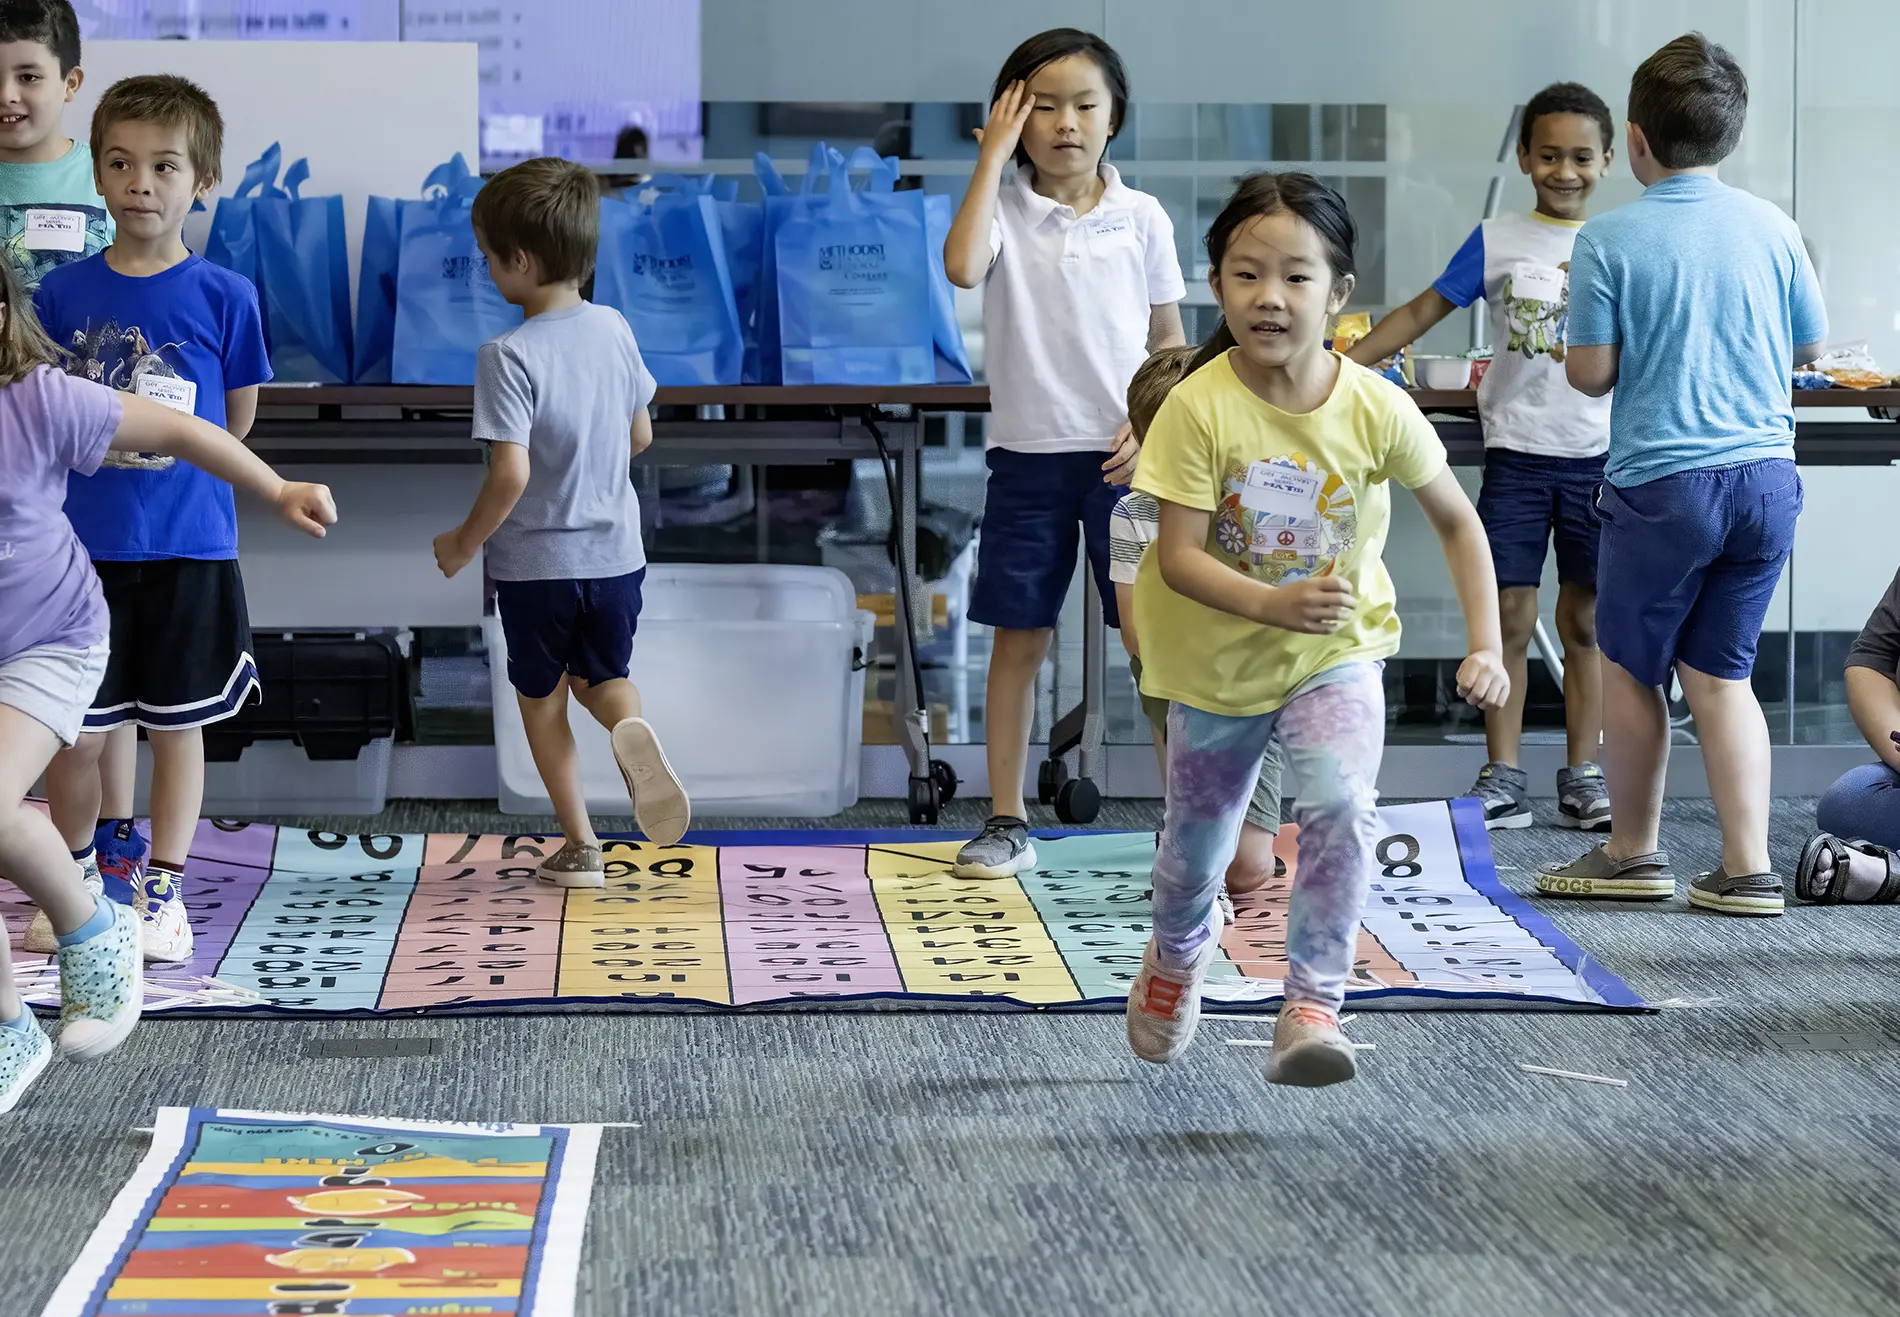 Counting on fun: Math & Movement mini-academy integrates play with learning